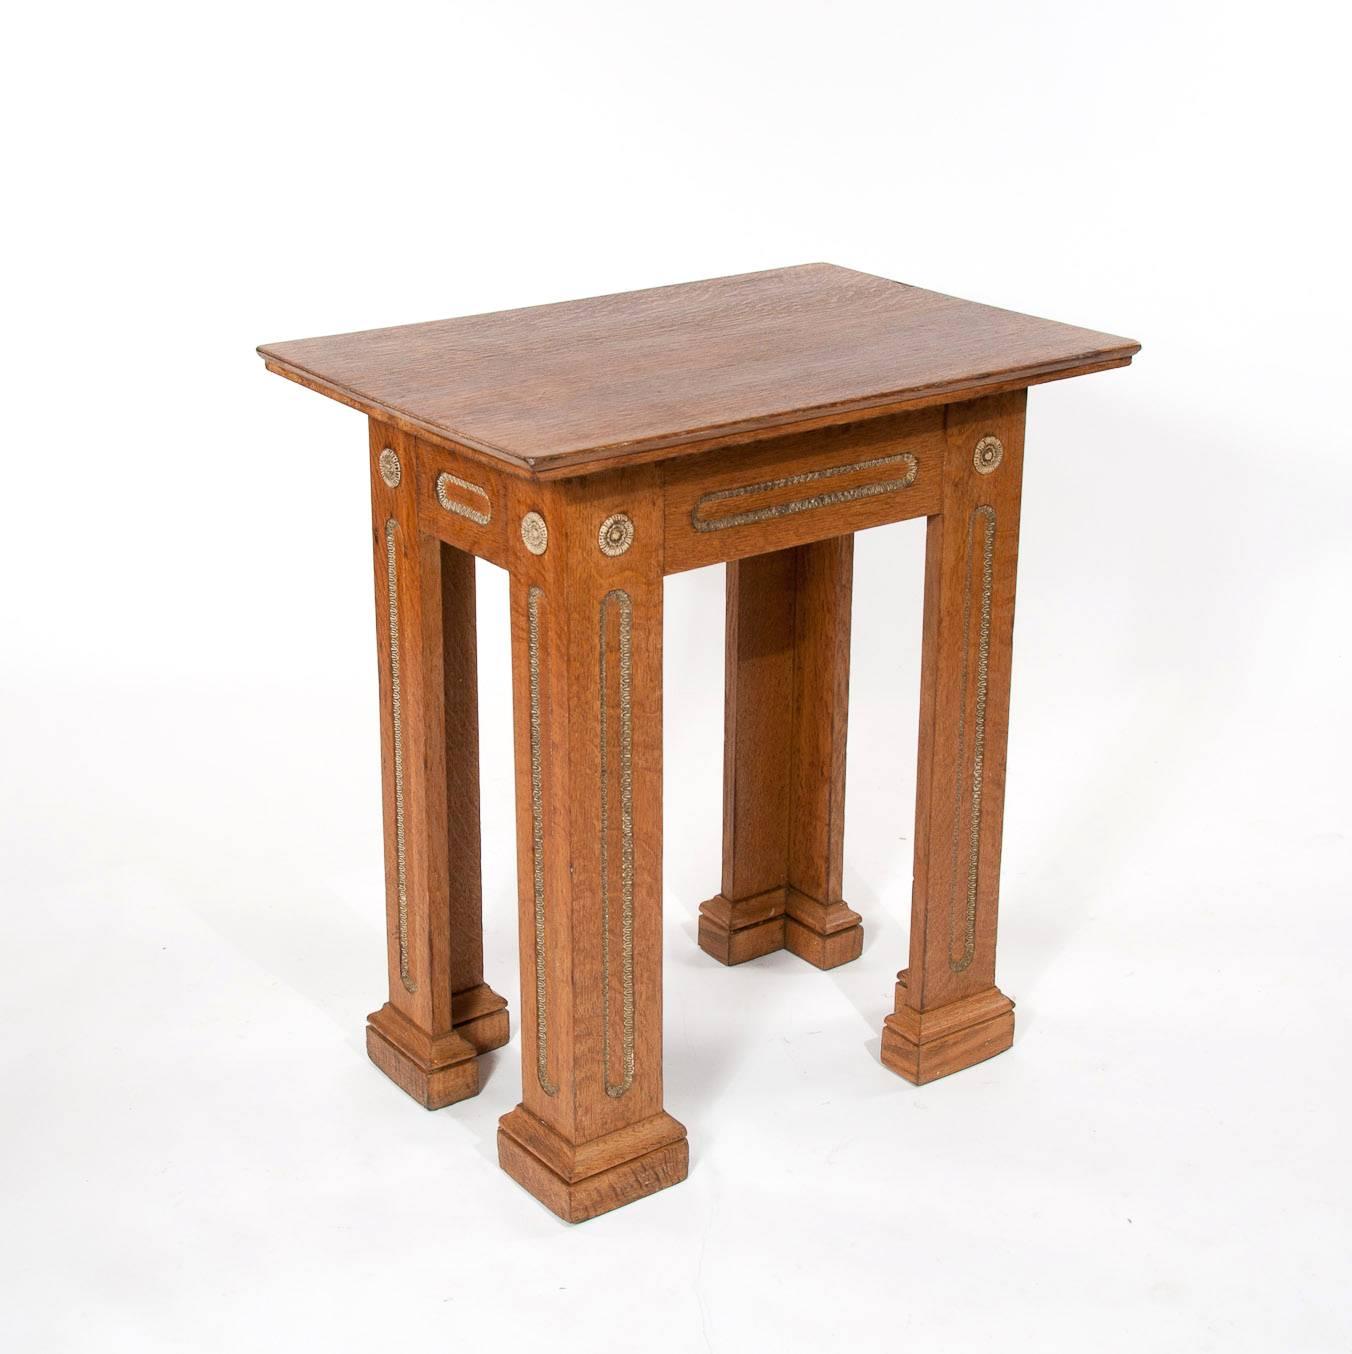 A very unusual and rare quality oak architectural table with carved resin mould decoration dating to 1920s.

The rectangular oak top over an architectural base with the frieze having inset carved carved resin mould decorations which follow down